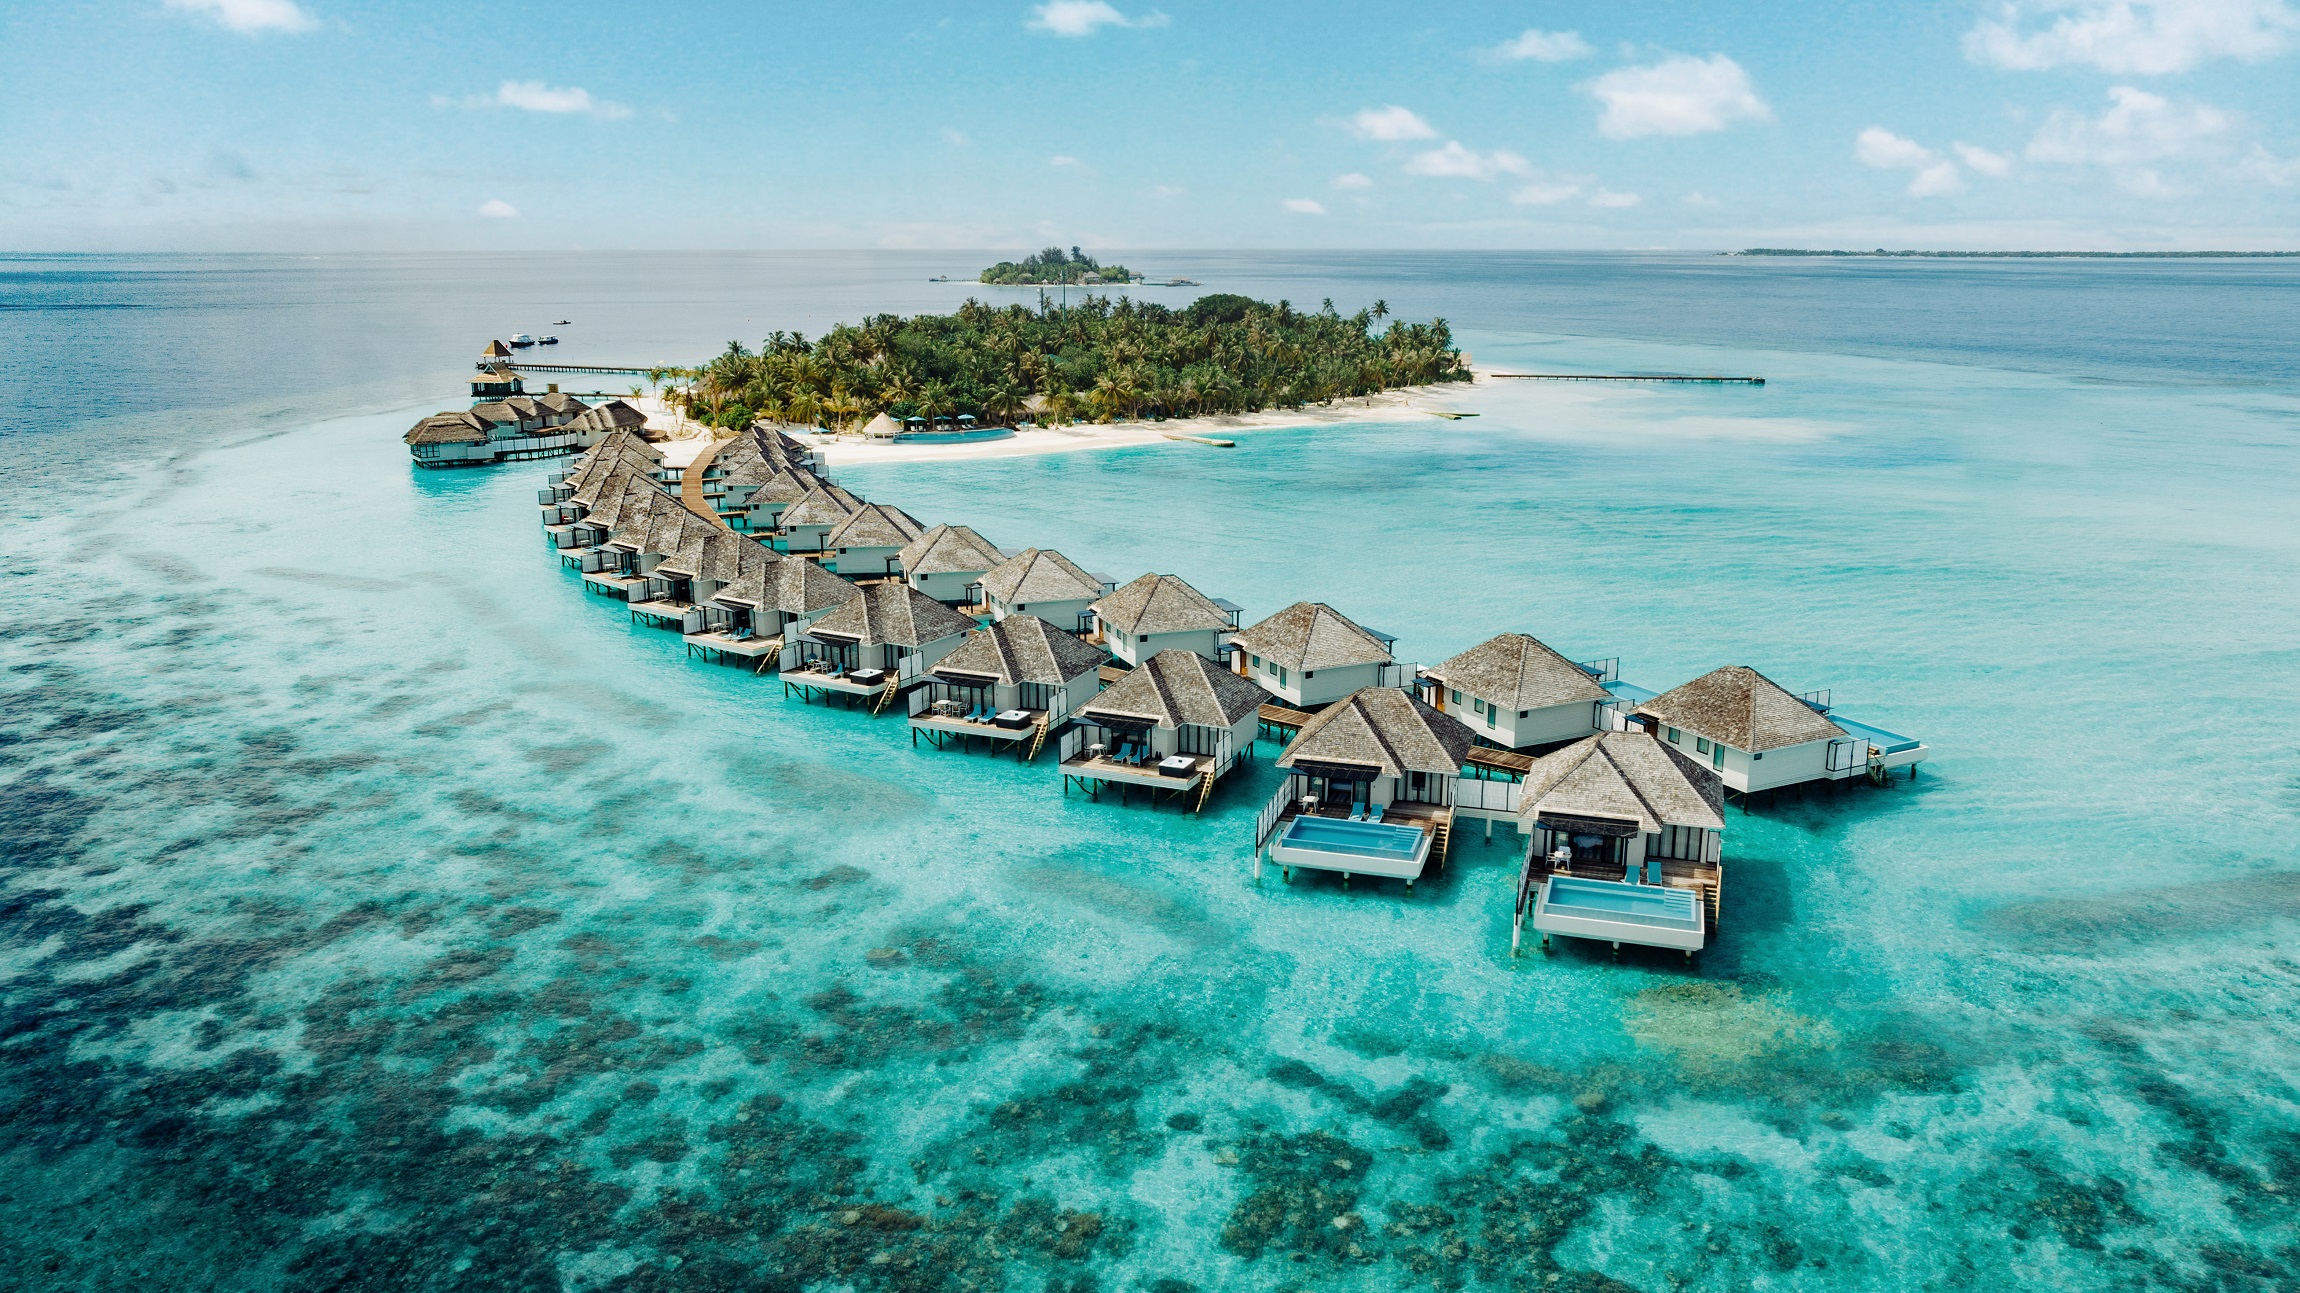 Welcoming Nova Maldives - the bright new star among resorts in the Maldives that invites guests for “Good soul days”